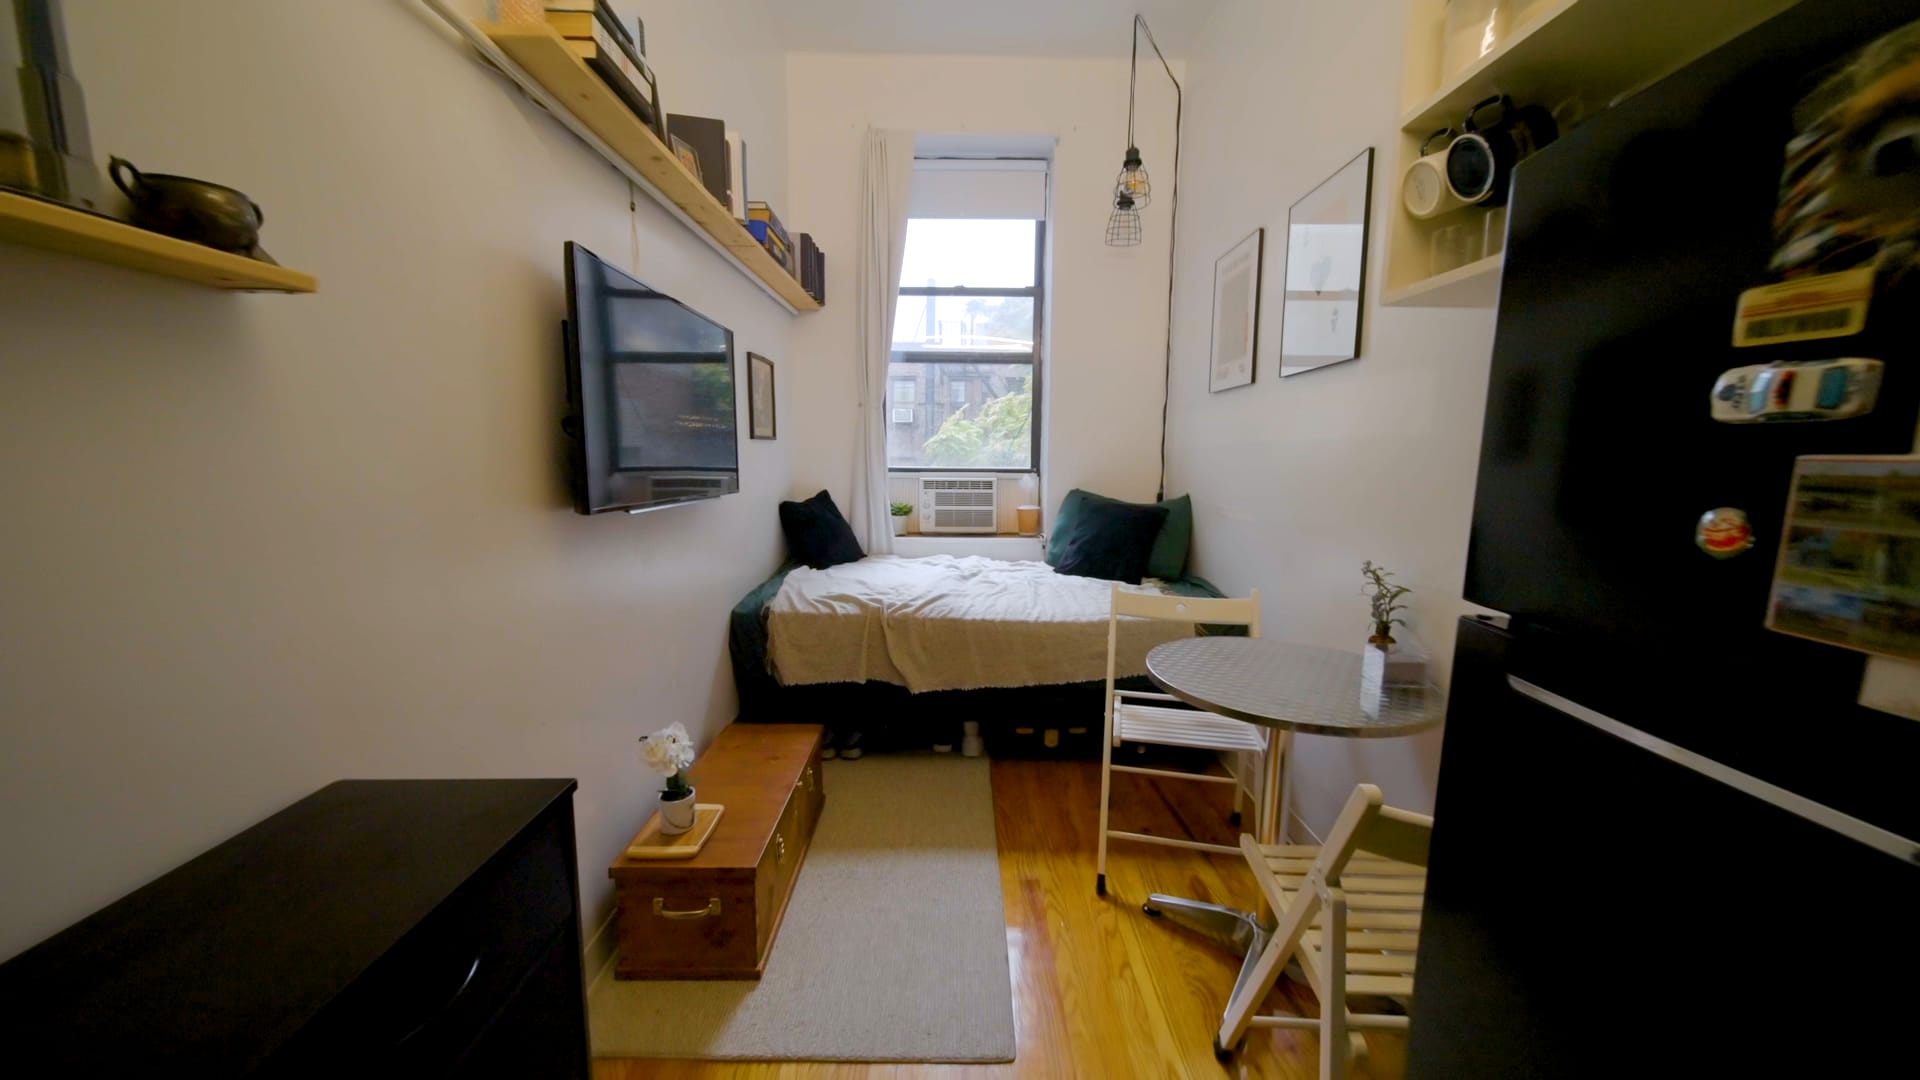 Verhaeg's 95 sq. ft apartment is about 16 feet x 8 feet or about the size of an average parking spot.